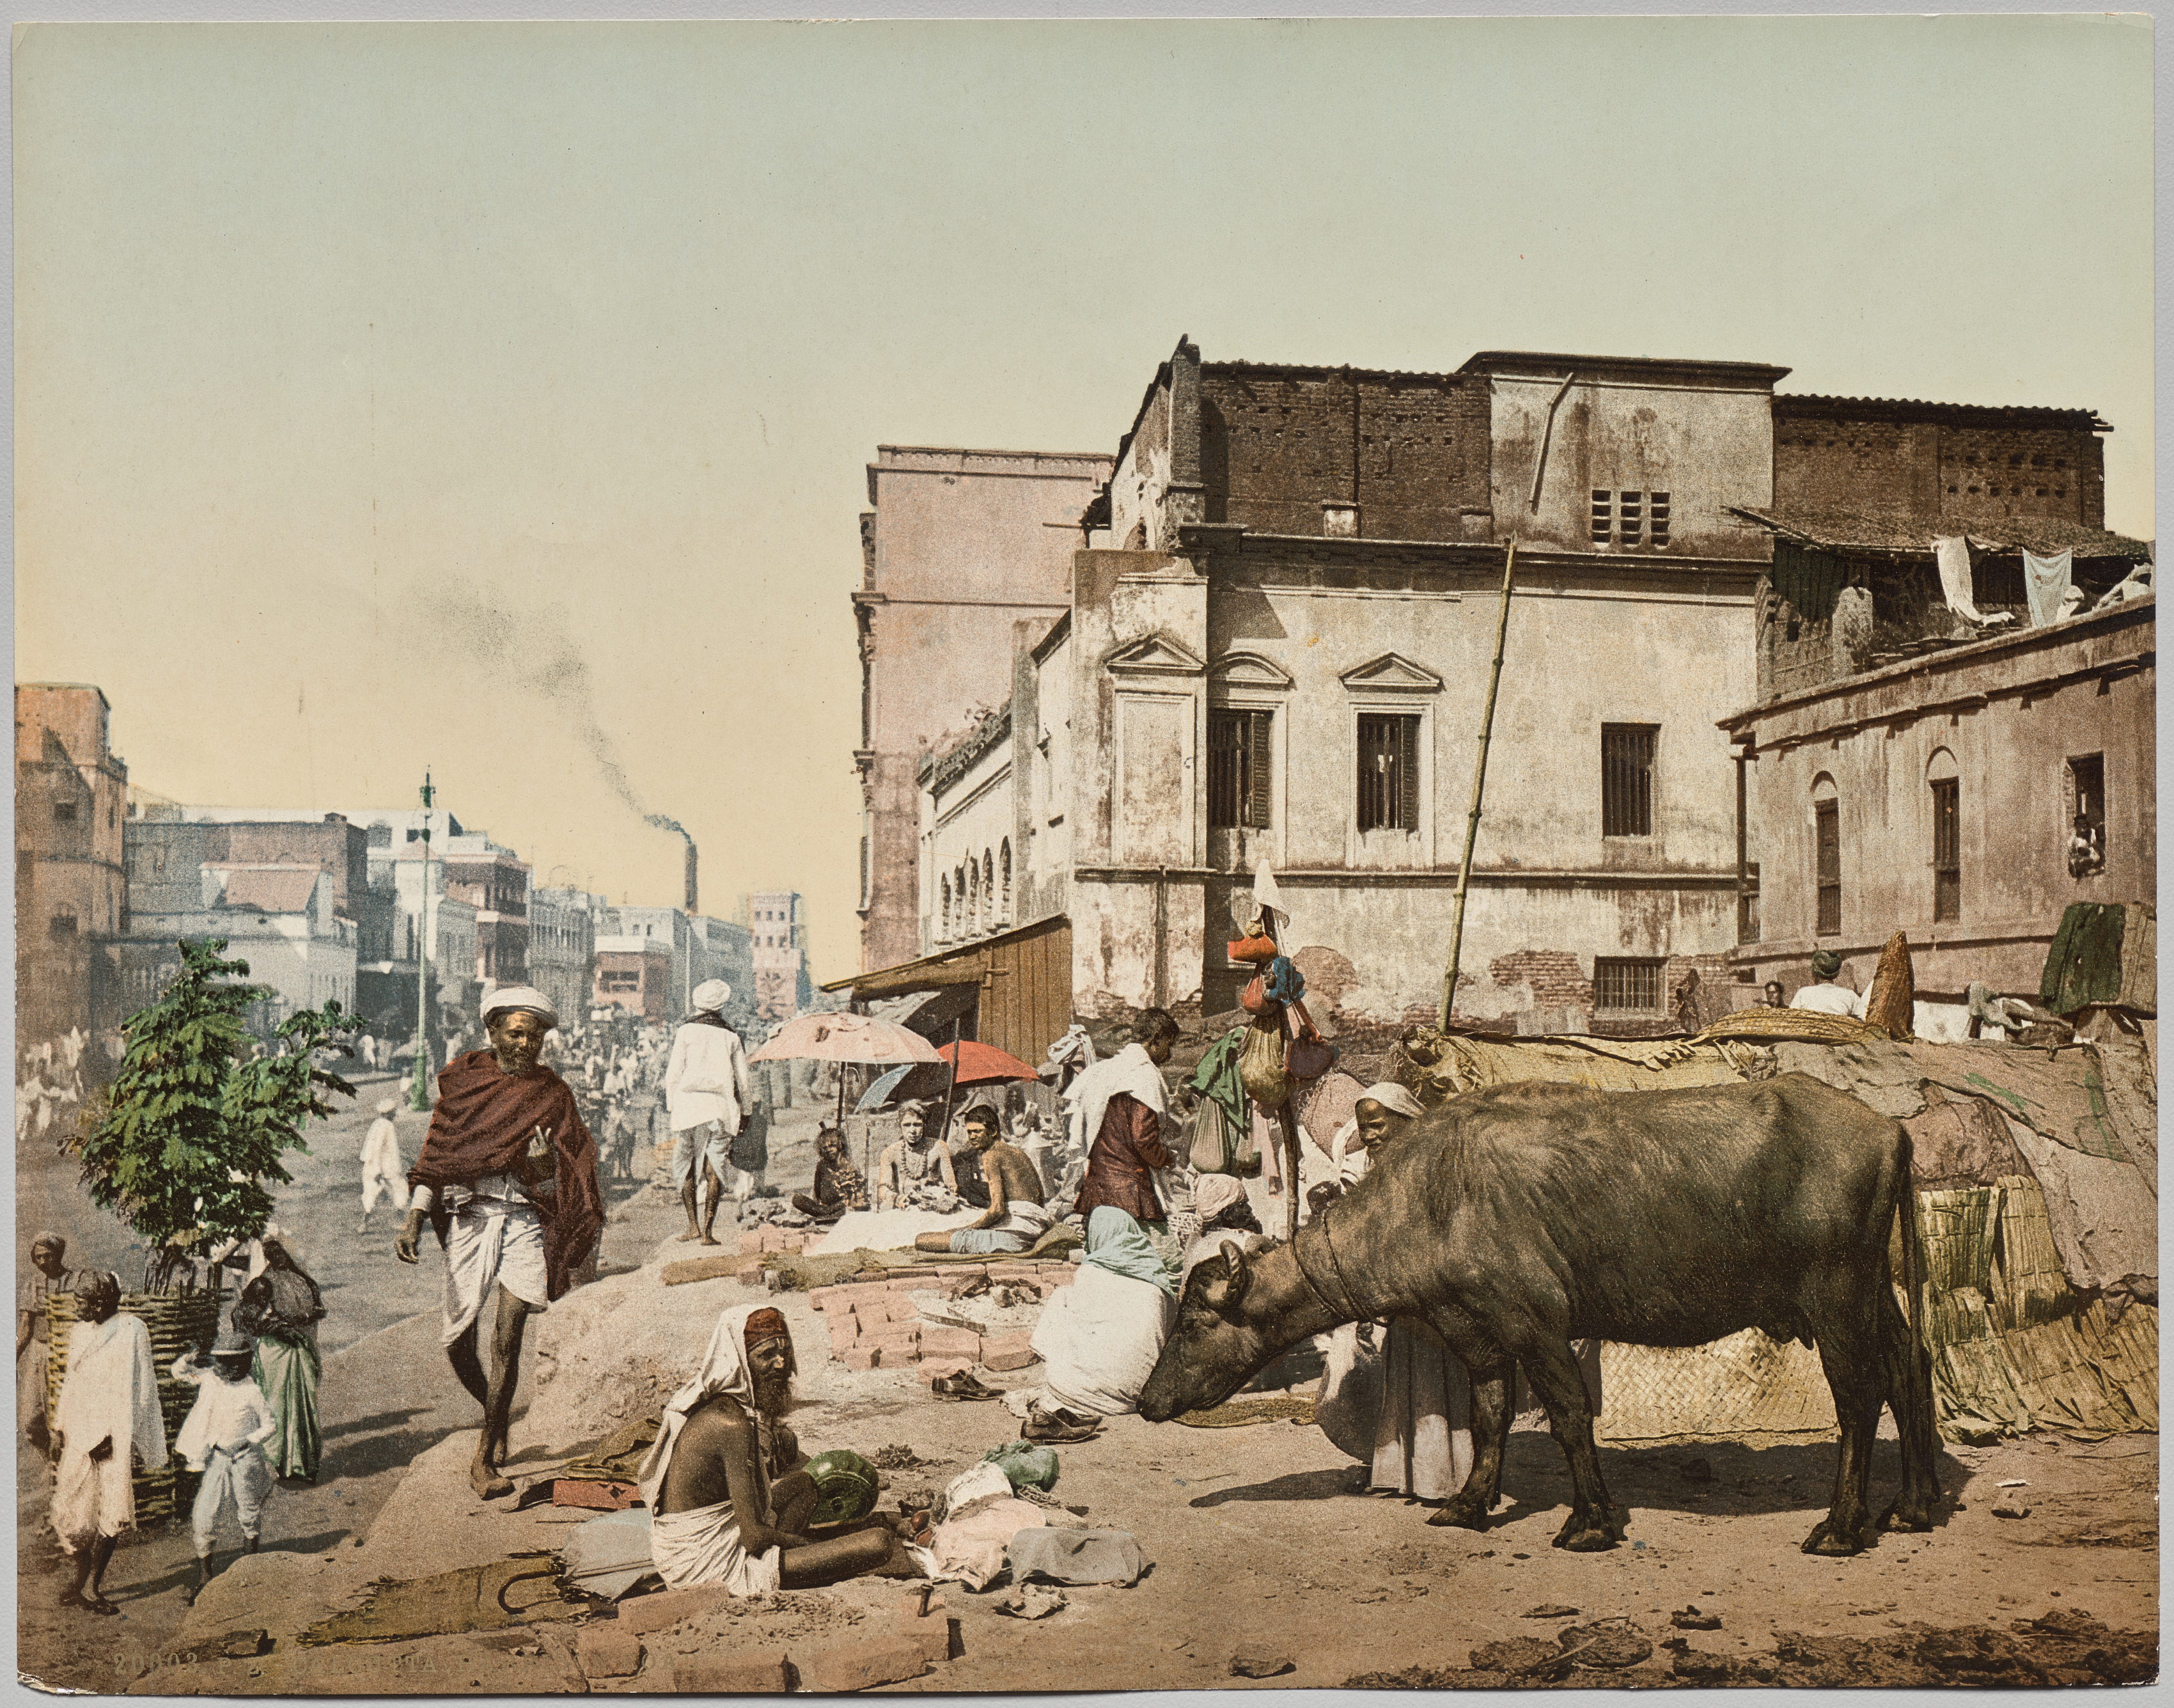 India. Calcutta. Harrison Road I with Group of Jogees, after photo by Dr. Kurt Boeck